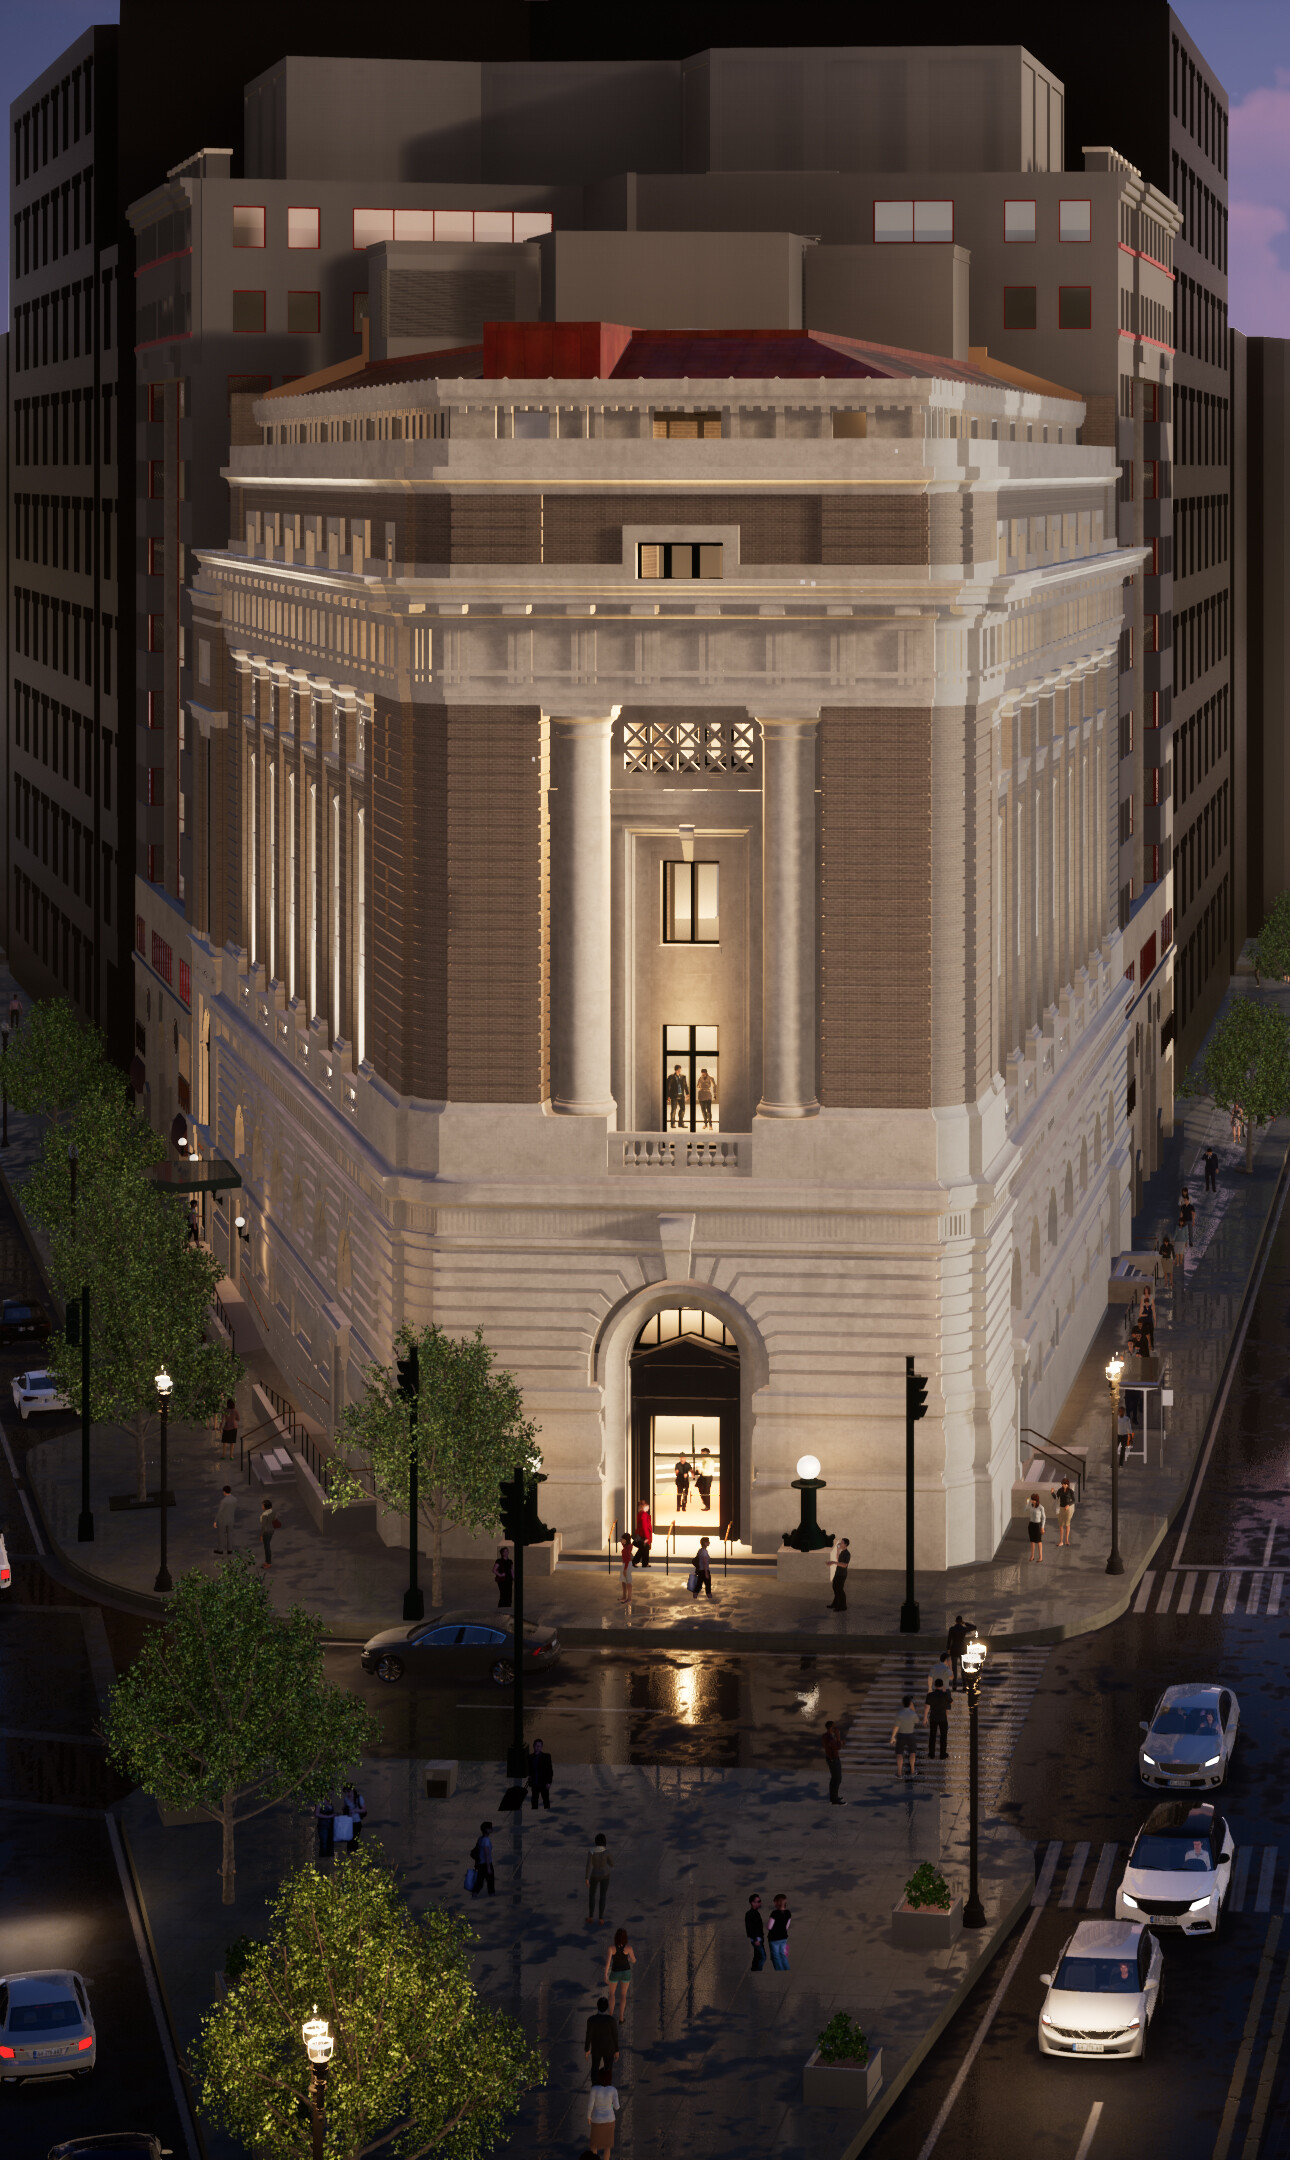 A digital rendering shows the exterior of a historic building in an urban setting at night. Interior lights shine onto the street below. The building is several stories tall, constructed of gray and tan stone, with an arched doorway, high windows, and detailed cornice around the roof. Tiny digitally rendered people are visible inside through the windows and walking on the street outside.